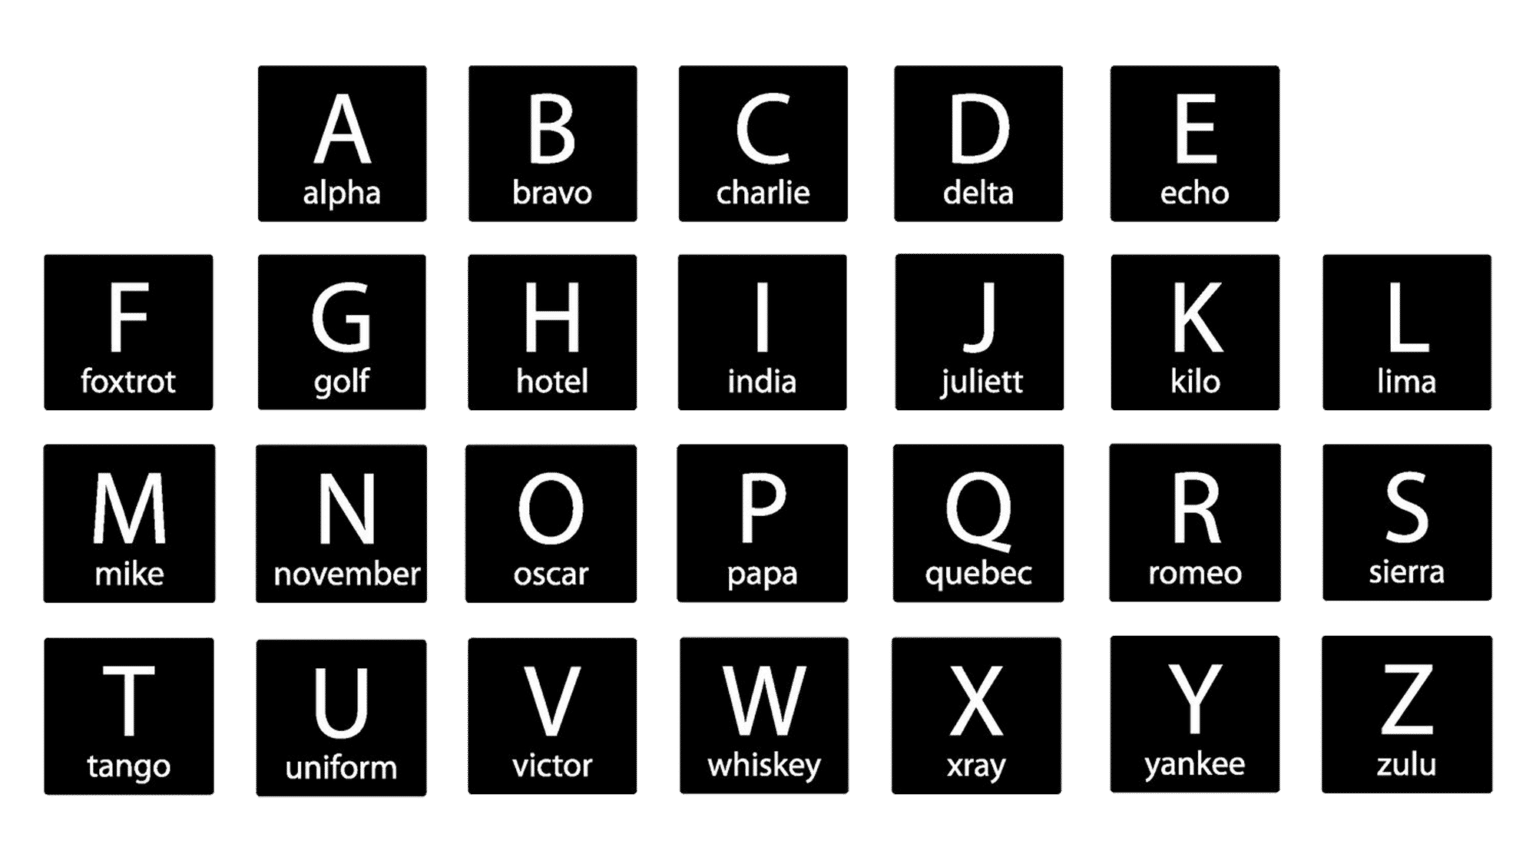 NATO Phonetic Alphabet In Canada A Guide For Boaters